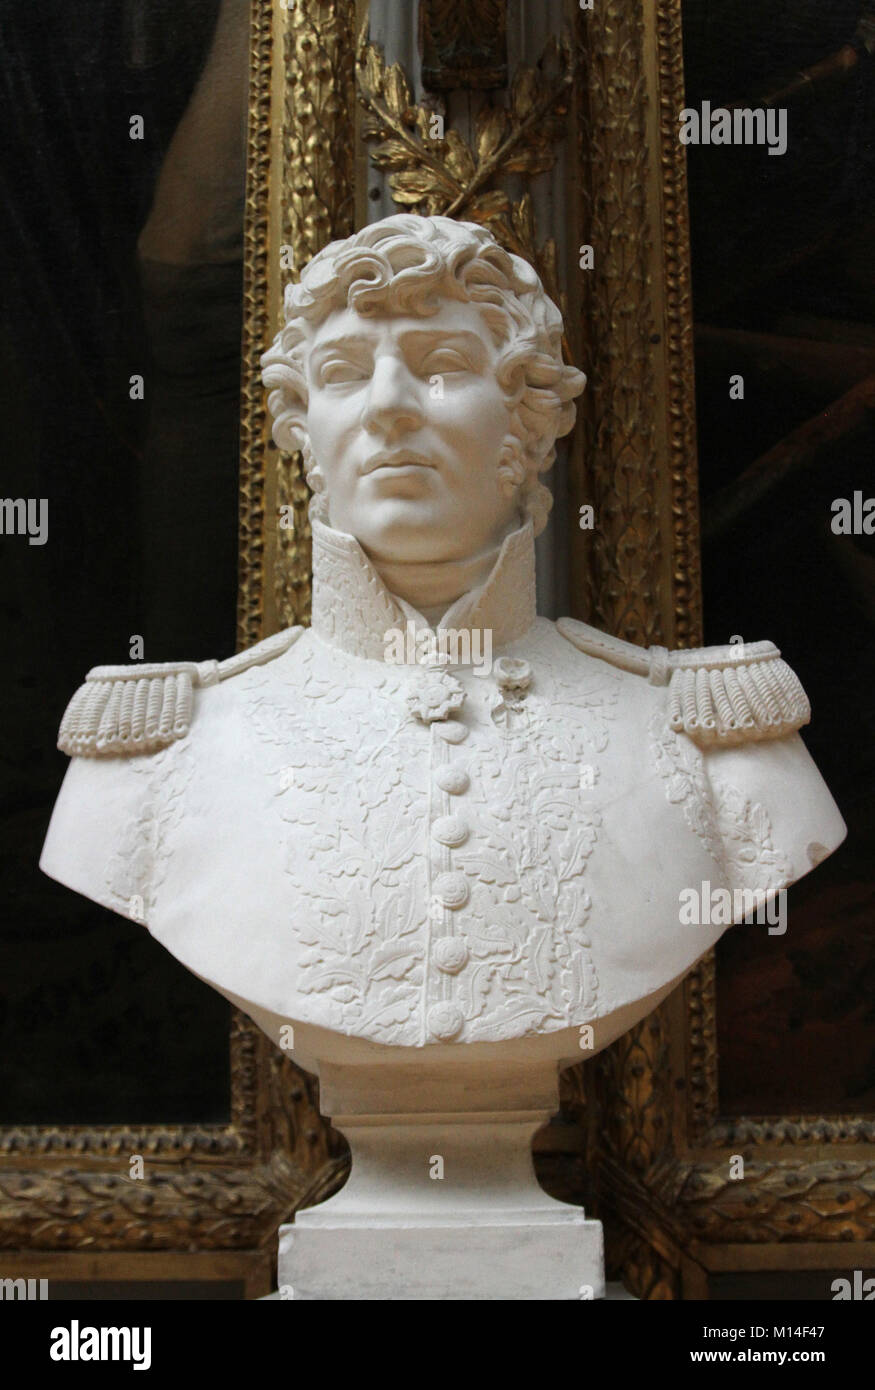 Marble bust of General Jean-Baptiste Cervoni by Pietro Cardelli in the Gallery of Battles, Versailles Palace, Ile-De-France, France. Stock Photo